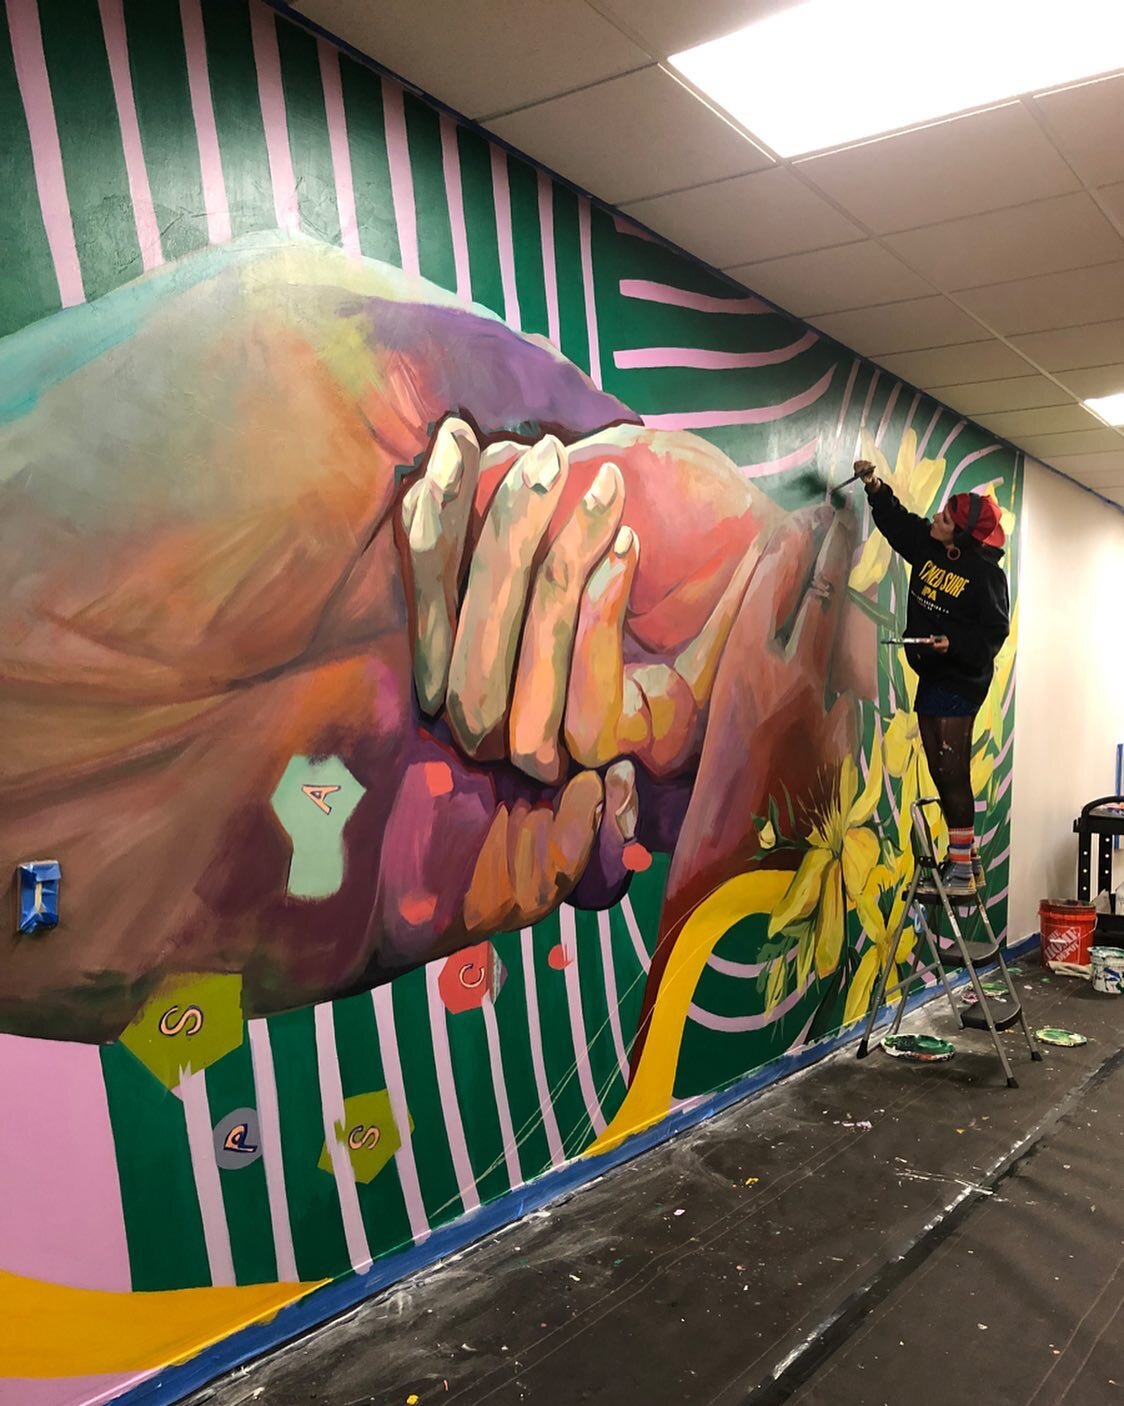 ⚠️INSTALL SZN⚠️
Auuuoooo we are off and running! @umrochester mural is going up right now (more pics soon 🤠🥳) and then we are headed to Massachusetts next week! Updates on that to come! 🌻⚡️🌈☀️
.
.
.
#rst #rochester #umr #uofmn #mural #community